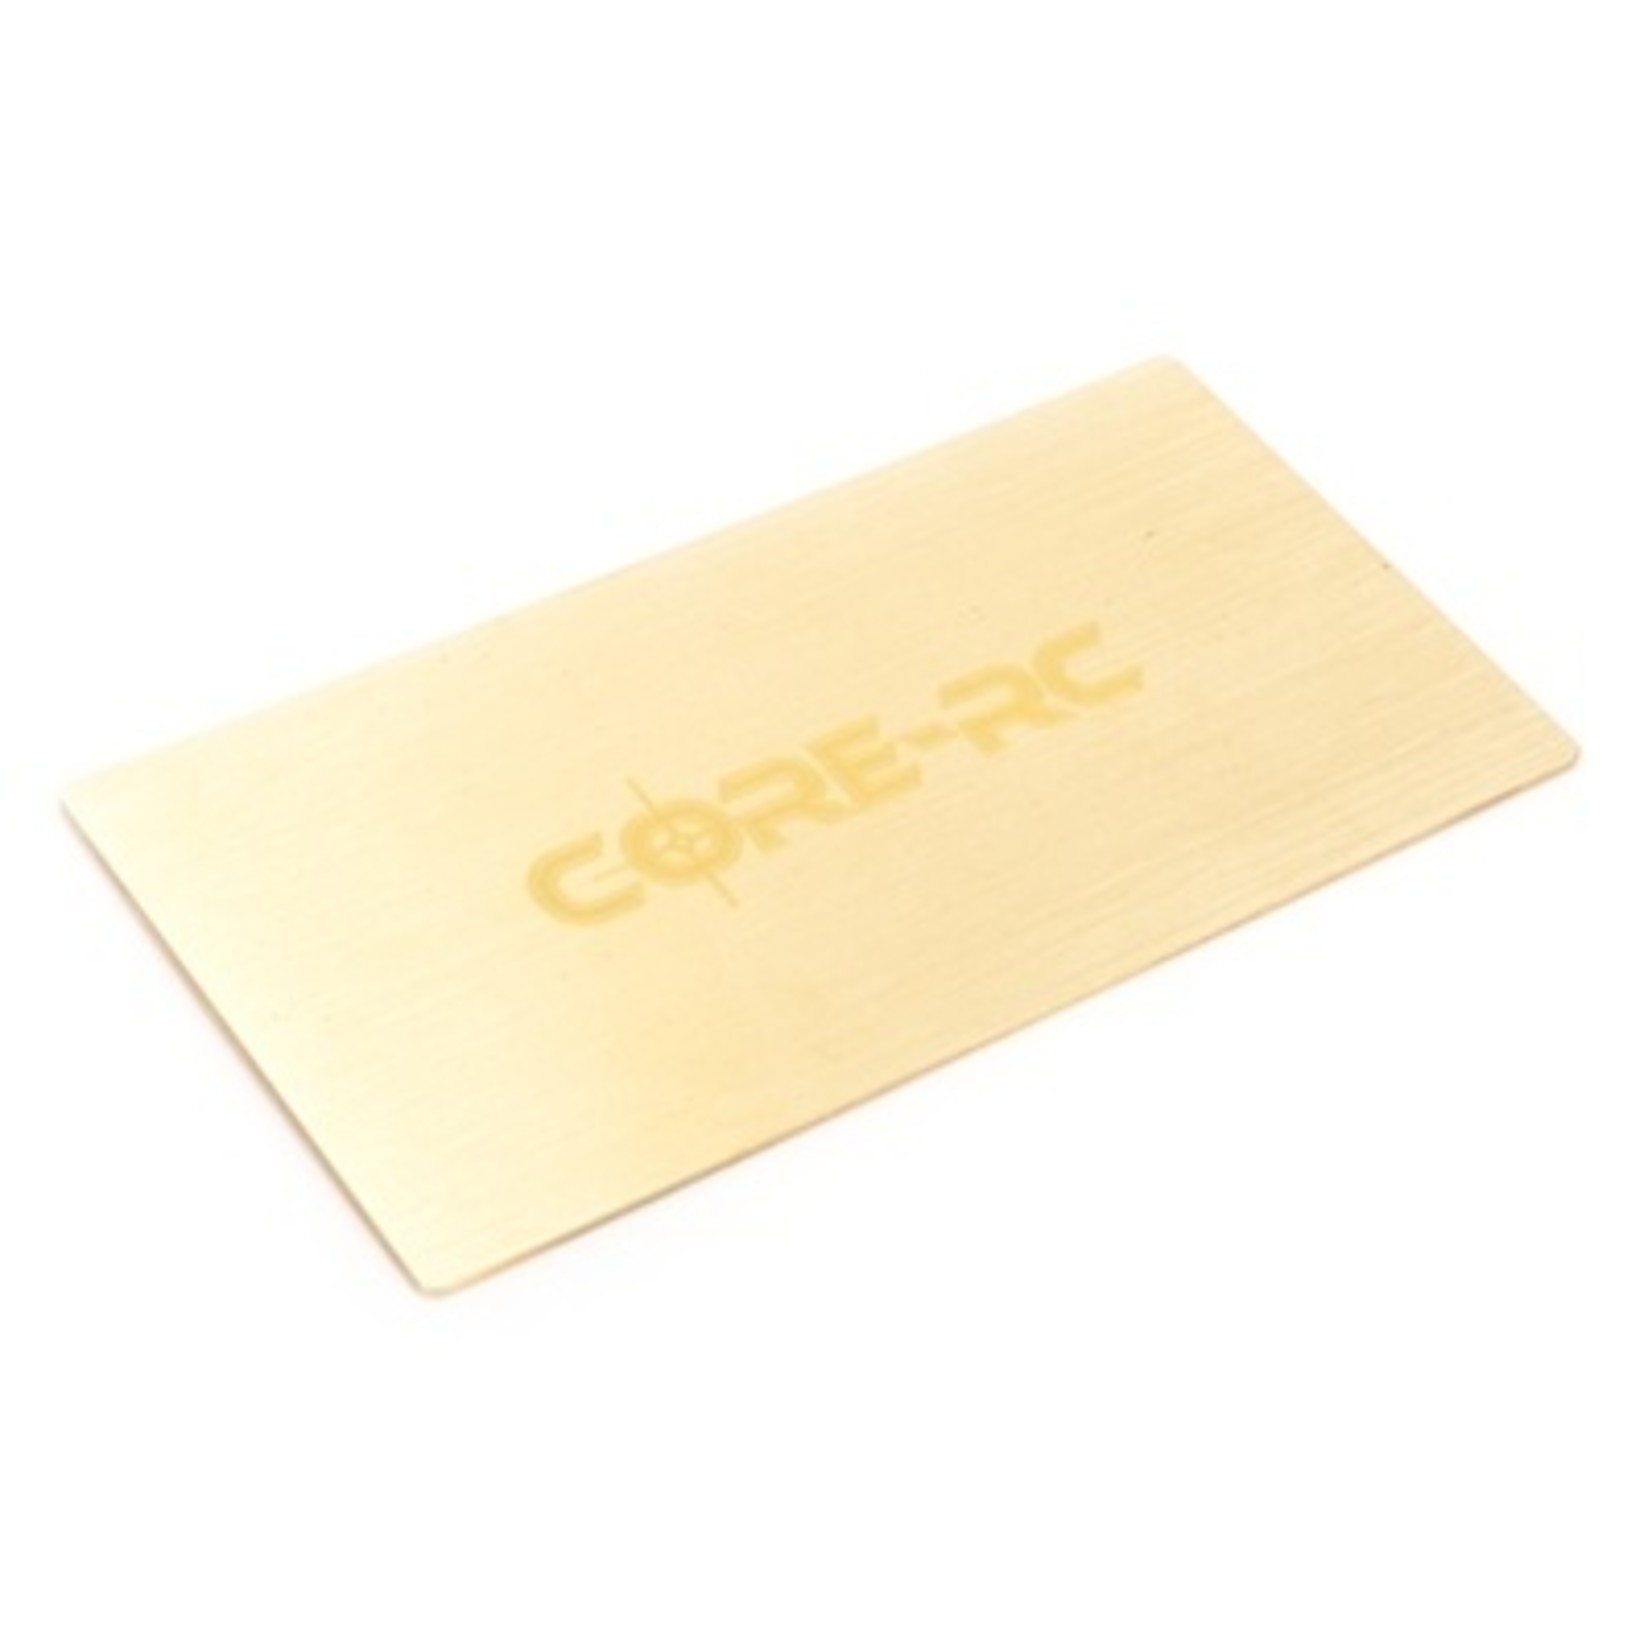 Core RC CR519 CORE RC  - Under LiPo Weight 35g brass 1S/Shorty